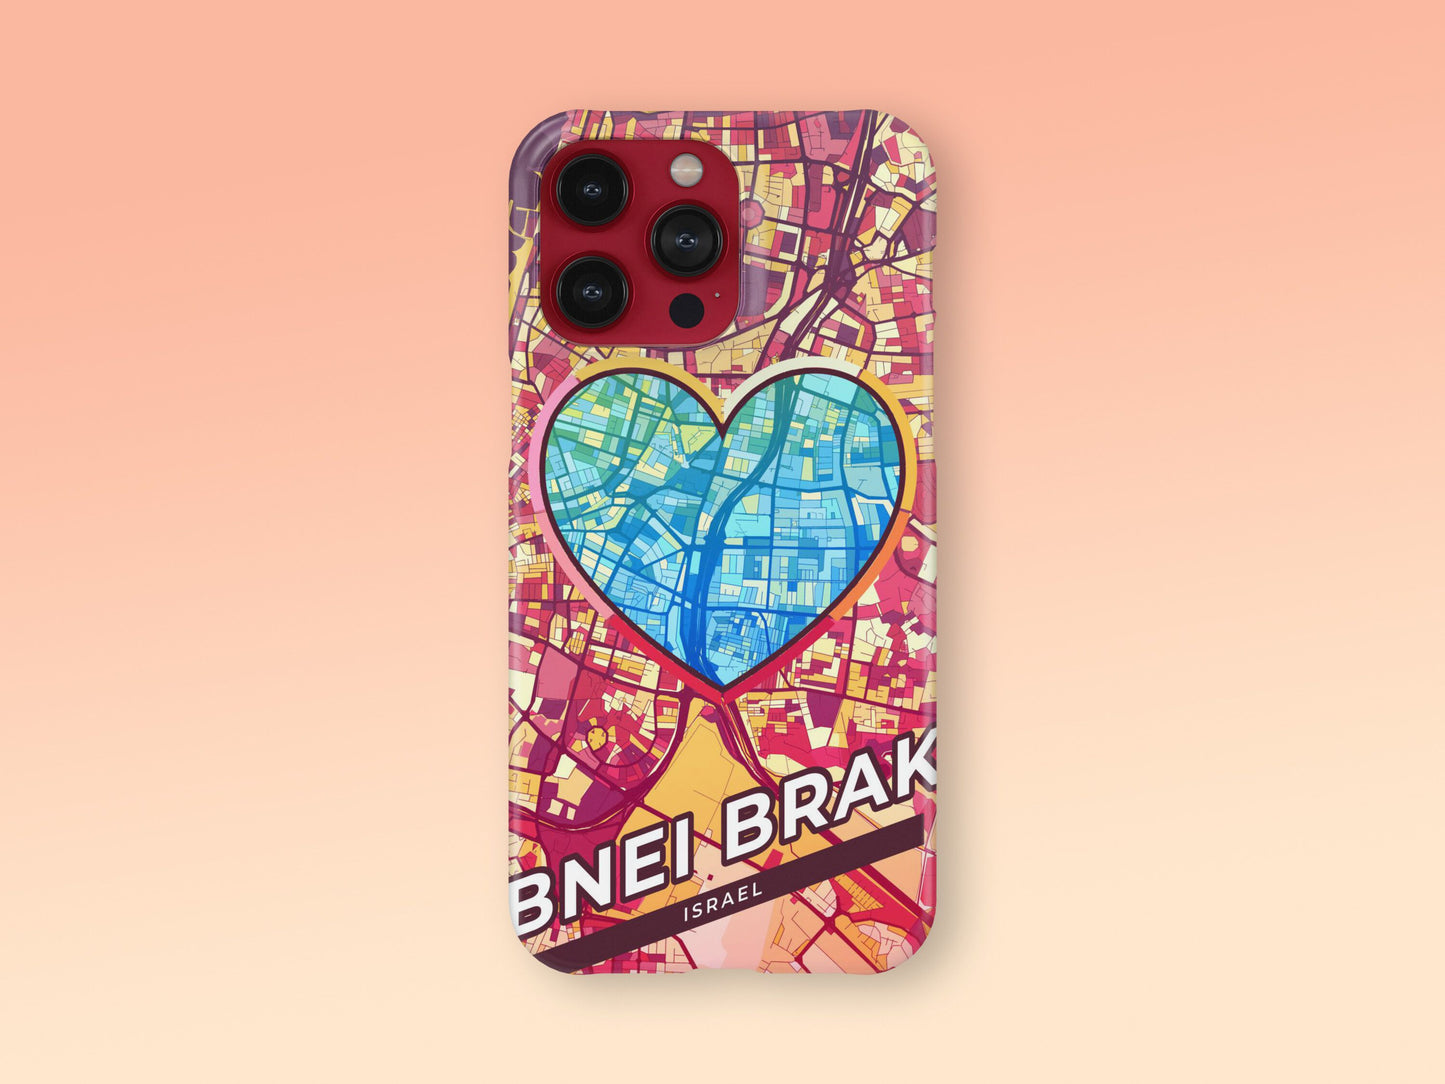 Bnei Brak Israel slim phone case with colorful icon. Birthday, wedding or housewarming gift. Couple match cases. 2